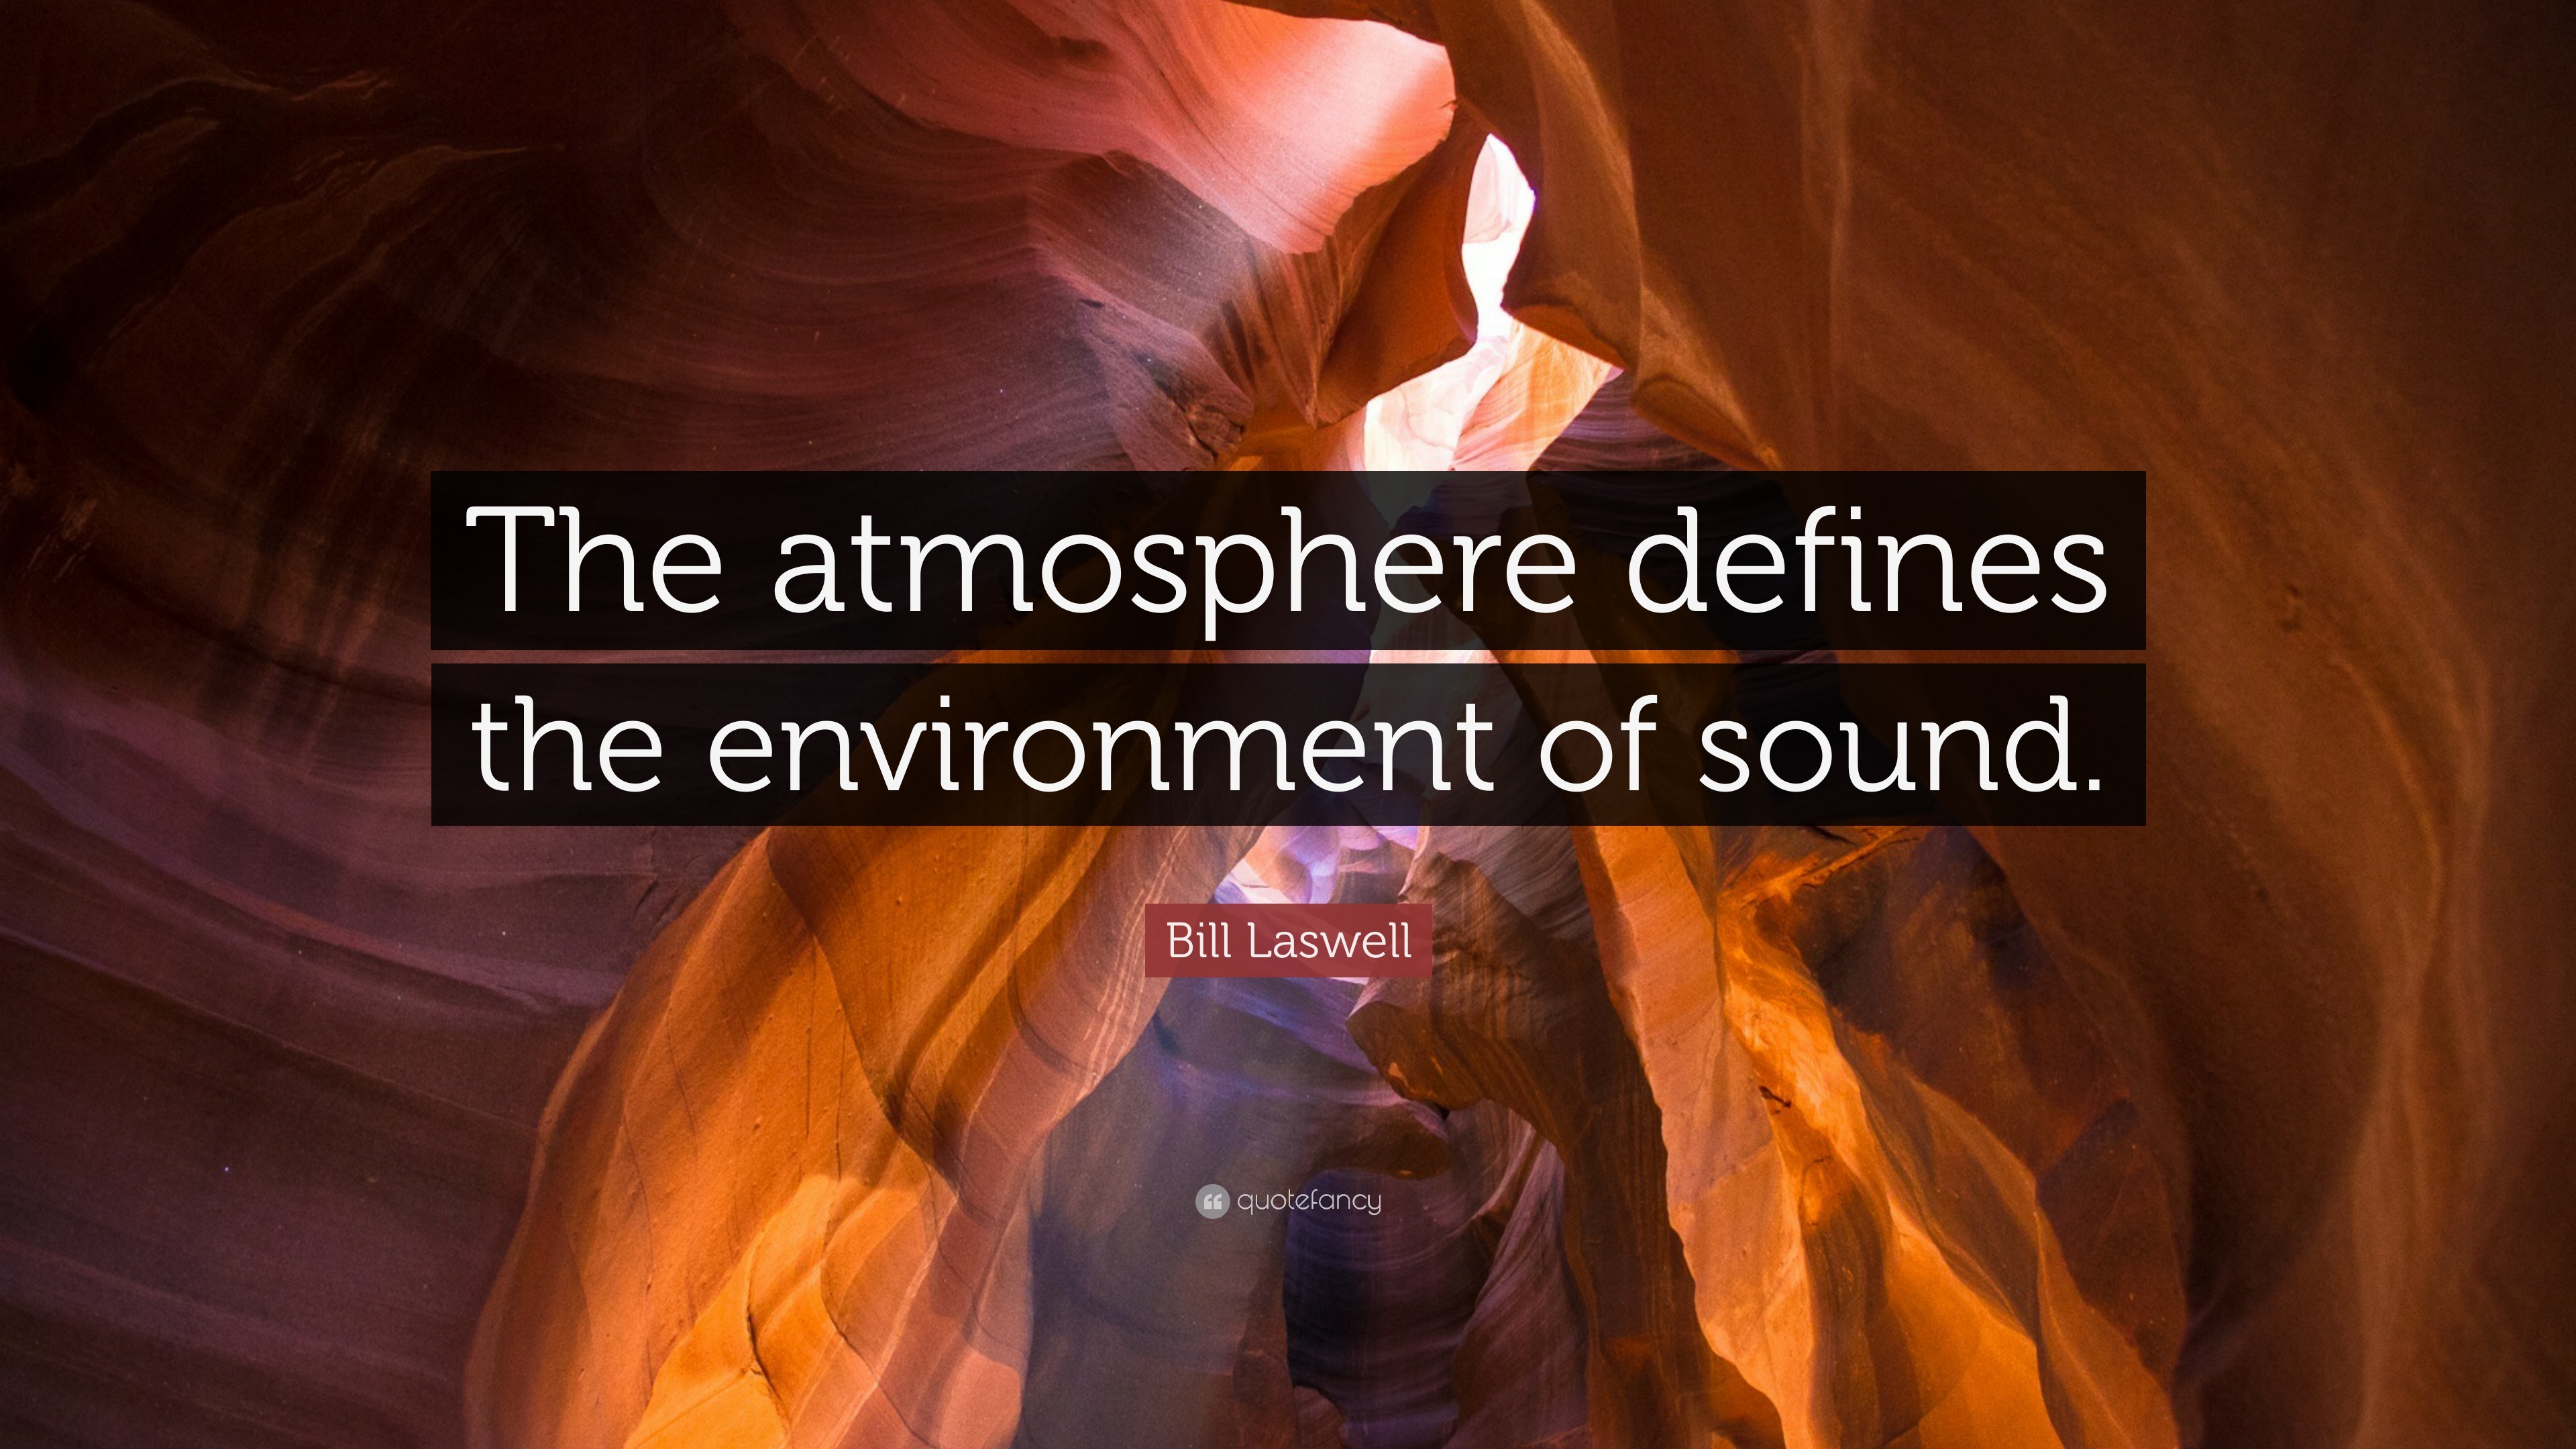 Bill laswell quote âthe atmosphere defines the environment of soundâ